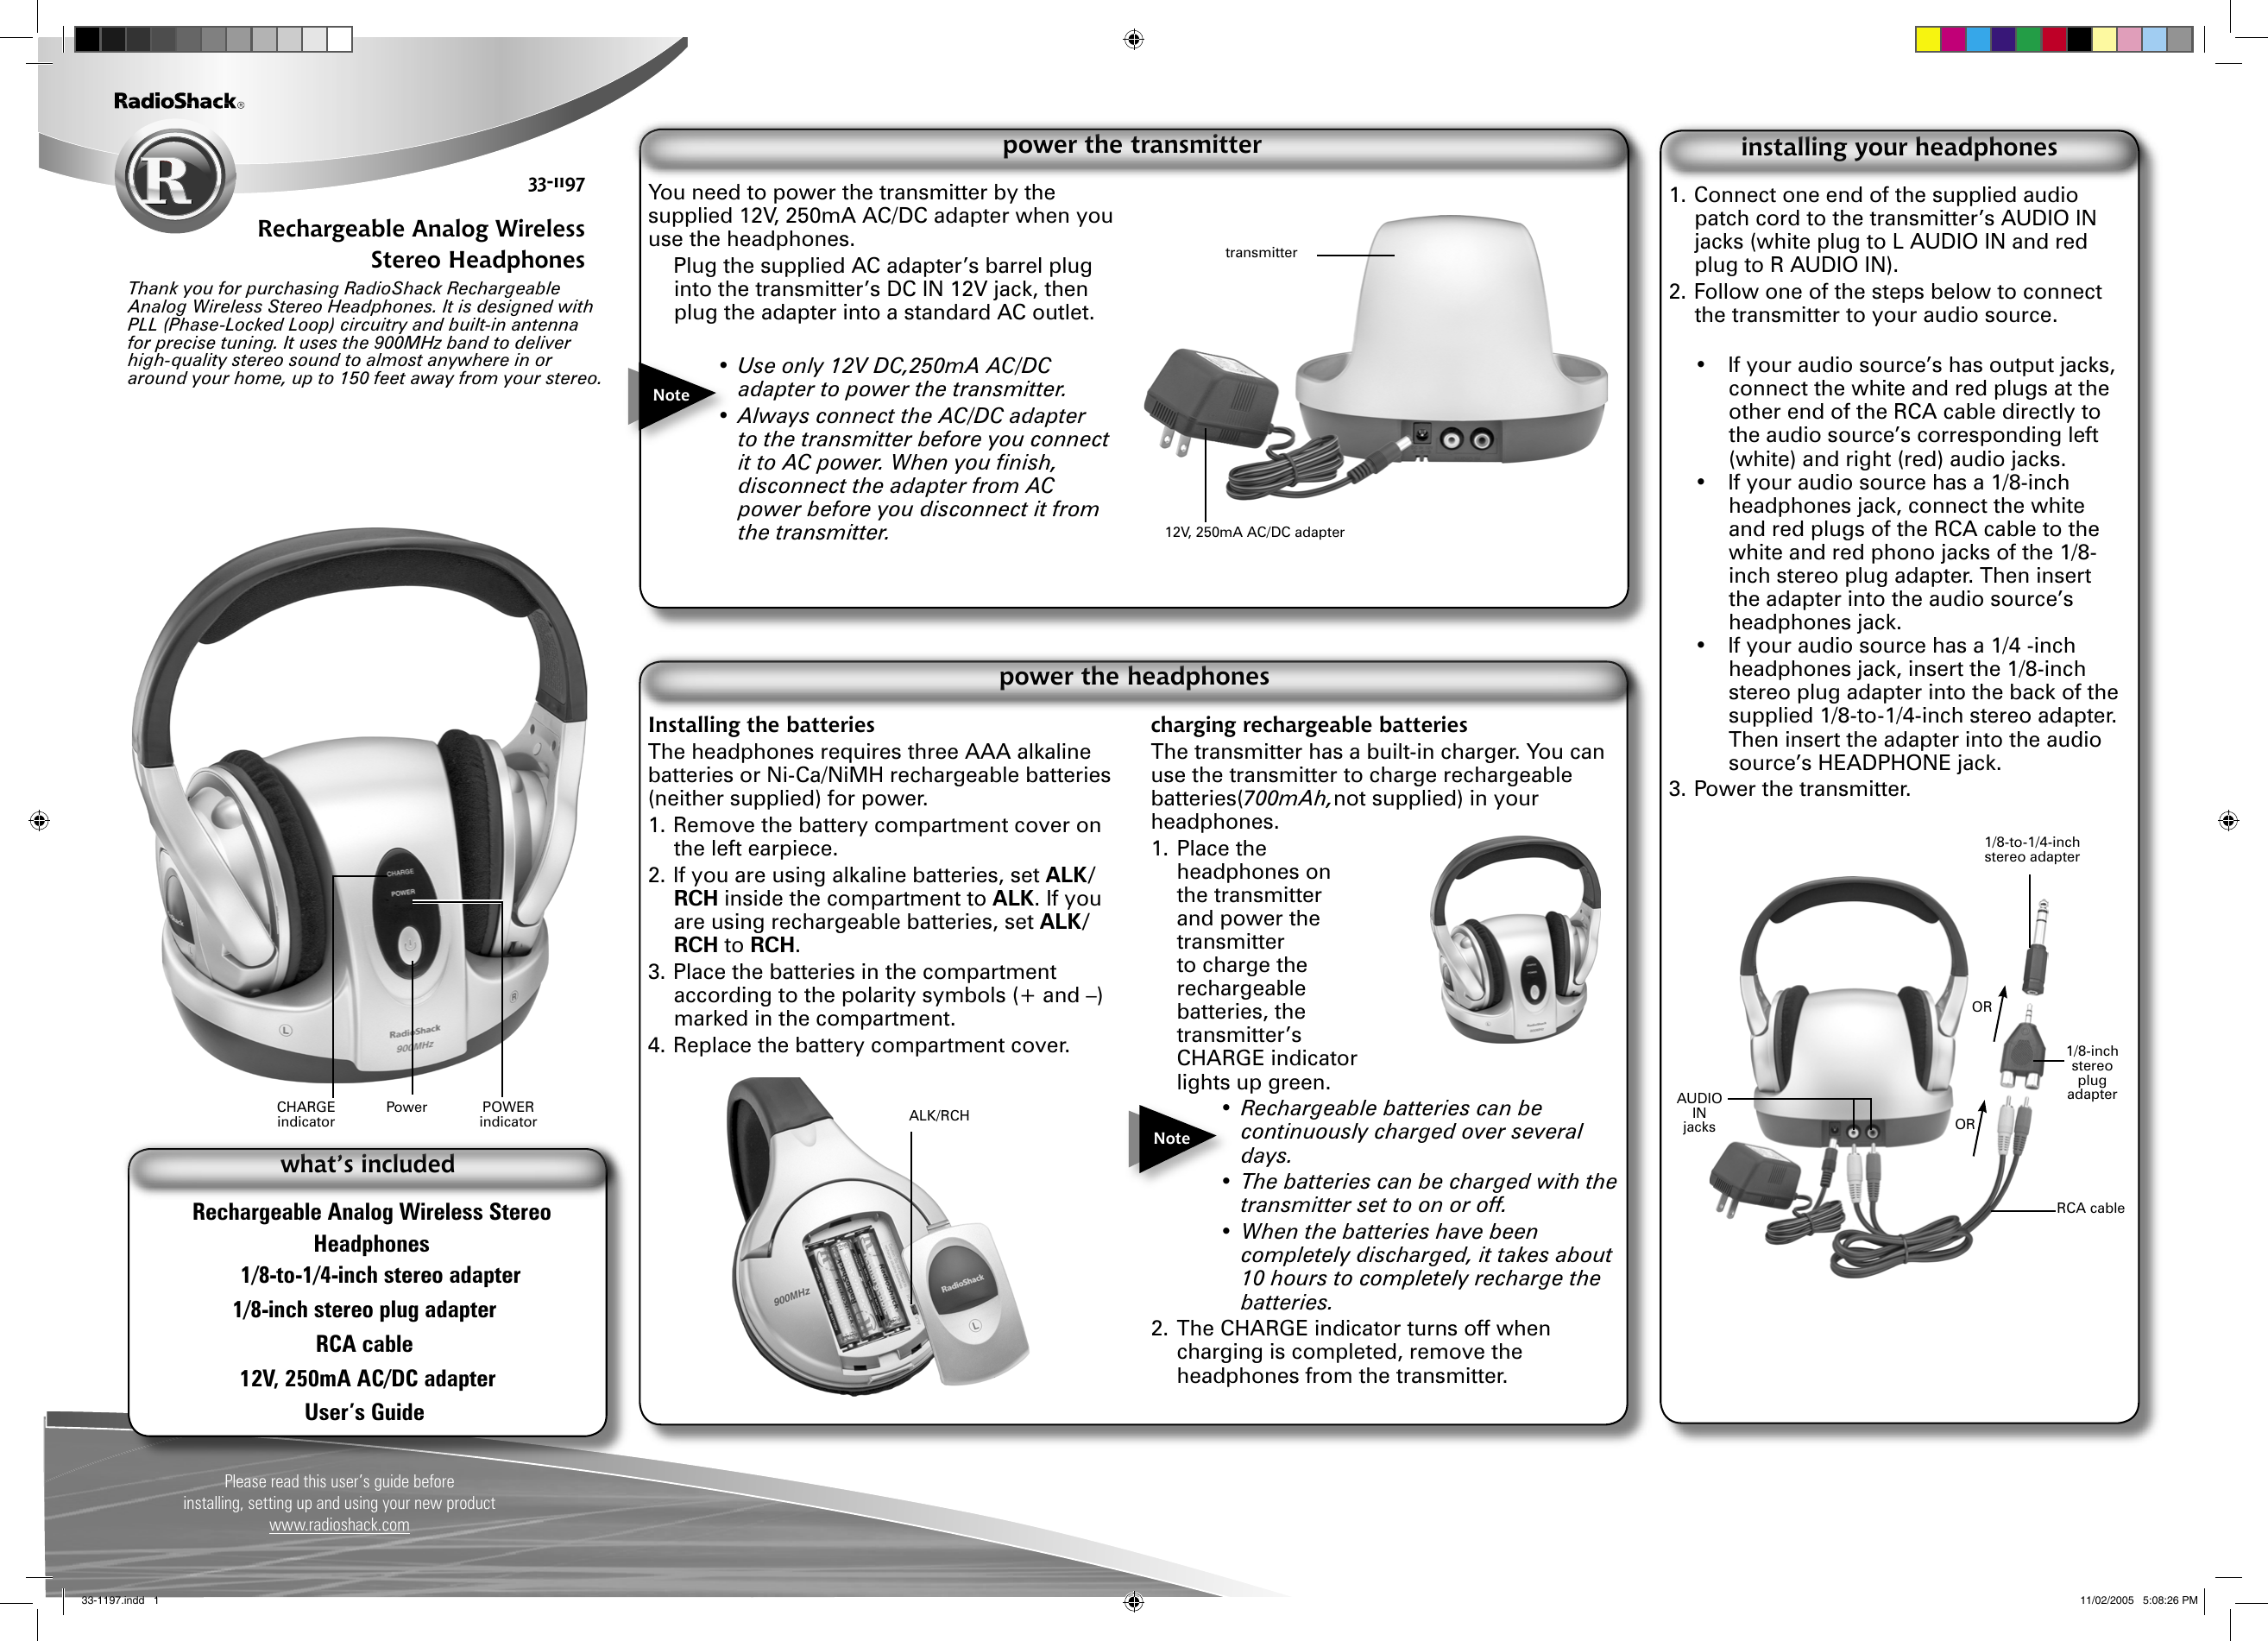 Please read this user’s guide before installing, setting up and using your new productwww.radioshack.com33-1197Rechargeable Analog Wireless Stereo HeadphonesThank you for purchasing RadioShack Rechargeable Analog Wireless Stereo Headphones. It is designed with PLL (Phase-Locked Loop) circuitry and built-in antenna for precise tuning. It uses the 900MHz band to deliver high-quality stereo sound to almost anywhere in or around your home, up to 150 feet away from your stereo. Rechargeable Analog Wireless Stereo Headphones1/8-to-1/4-inch stereo adapter1/8-inch stereo plug adapterRCA cable12V, 250mA AC/DC adapterUser’s Guidewhat’s includedYou need to power the transmitter by the supplied 12V, 250mA AC/DC adapter when you use the headphones.  Plug the supplied AC adapter’s barrel plug into the transmitter’s DC IN 12V jack, then plug the adapter into a standard AC outlet.• Use only 12V DC,250mA AC/DC adapter to power the transmitter.• Always connect the AC/DC adapter to the transmitter before you connect it to AC power. When you ﬁnish, disconnect the adapter from AC power before you disconnect it from the transmitter.power the transmitterInstalling the batteriesThe headphones requires three AAA alkaline batteries or Ni-Ca/NiMH rechargeable batteries (neither supplied) for power.1. Remove the battery compartment cover on the left earpiece.2. If you are using alkaline batteries, set ALK/RCH inside the compartment to ALK. If you are using rechargeable batteries, set ALK/RCH to RCH.3. Place the batteries in the compartment according to the polarity symbols (+ and –) marked in the compartment.4. Replace the battery compartment cover.charging rechargeable batteriesThe transmitter has a built-in charger. You can use the transmitter to charge rechargeable batteries(700mAh,not supplied) in your headphones.1. Place the headphones on the transmitter and power the transmitter to charge the rechargeable batteries, the transmitter’s CHARGE indicator lights up green. •  Rechargeable batteries can be continuously charged over several days.•  The batteries can be charged with the transmitter set to on or off.•  When the batteries have been completely discharged, it takes about 10 hours to completely recharge the batteries.2. The CHARGE indicator turns off when charging is completed, remove the headphones from the transmitter.power the headphonesNoteNote1. Connect one end of the supplied audio patch cord to the transmitter’s AUDIO IN jacks (white plug to L AUDIO IN and red plug to R AUDIO IN).2. Follow one of the steps below to connect the transmitter to your audio source.•  If your audio source’s has output jacks, connect the white and red plugs at the other end of the RCA cable directly to the audio source’s corresponding left (white) and right (red) audio jacks.•  If your audio source has a 1/8-inch headphones jack, connect the white and red plugs of the RCA cable to the white and red phono jacks of the 1/8-inch stereo plug adapter. Then insert the adapter into the audio source’s headphones jack.•  If your audio source has a 1/4 -inch headphones jack, insert the 1/8-inch stereo plug adapter into the back of the supplied 1/8-to-1/4-inch stereo adapter. Then insert the adapter into the audio source’s HEADPHONE jack.3. Power the transmitter.installing your headphones1/8-inch stereo plug adapter1/8-to-1/4-inch stereo adapterORORALK/RCHCHARGE indicatorPOWER indicatorPower AUDIO IN jacksRCA cable12V, 250mA AC/DC adaptertransmitter33-1197.indd   1 11/02/2005   5:08:26 PM